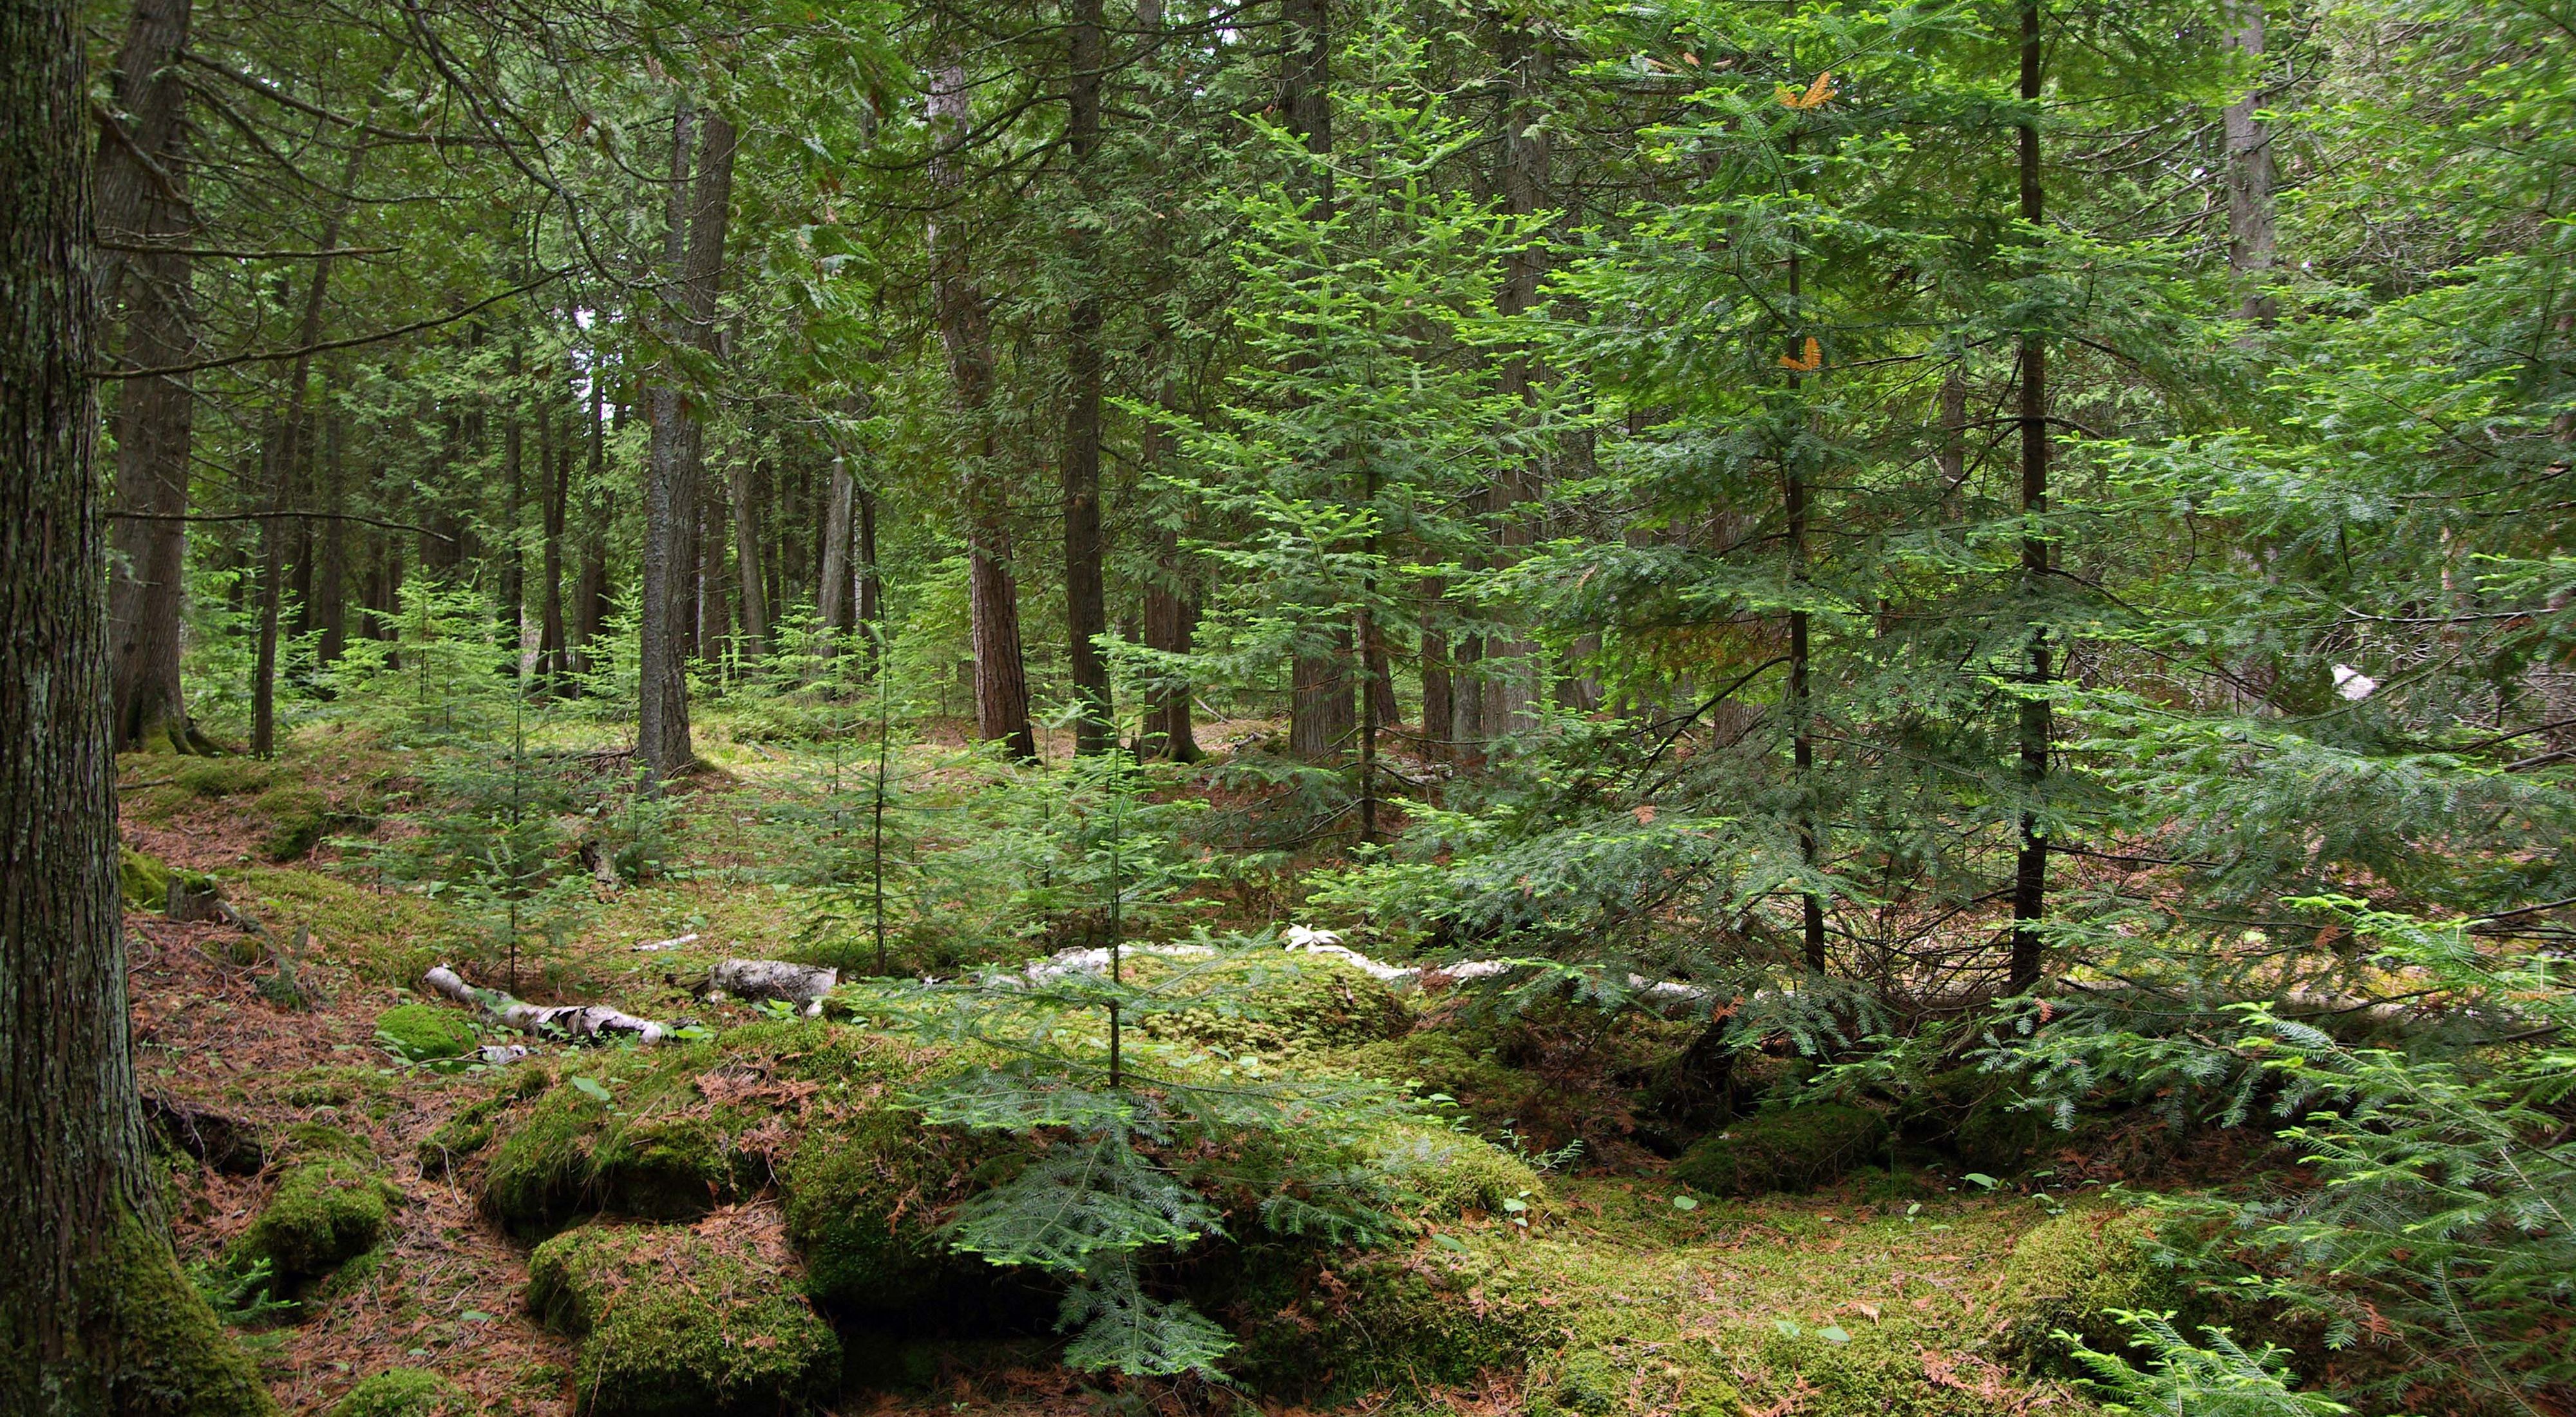 Interior forest scene of land TNC donated at Baileys Harbor Boreal Forest and Wetlands State Natural Area with large conifer trees, saplings and downed logs on forest floor